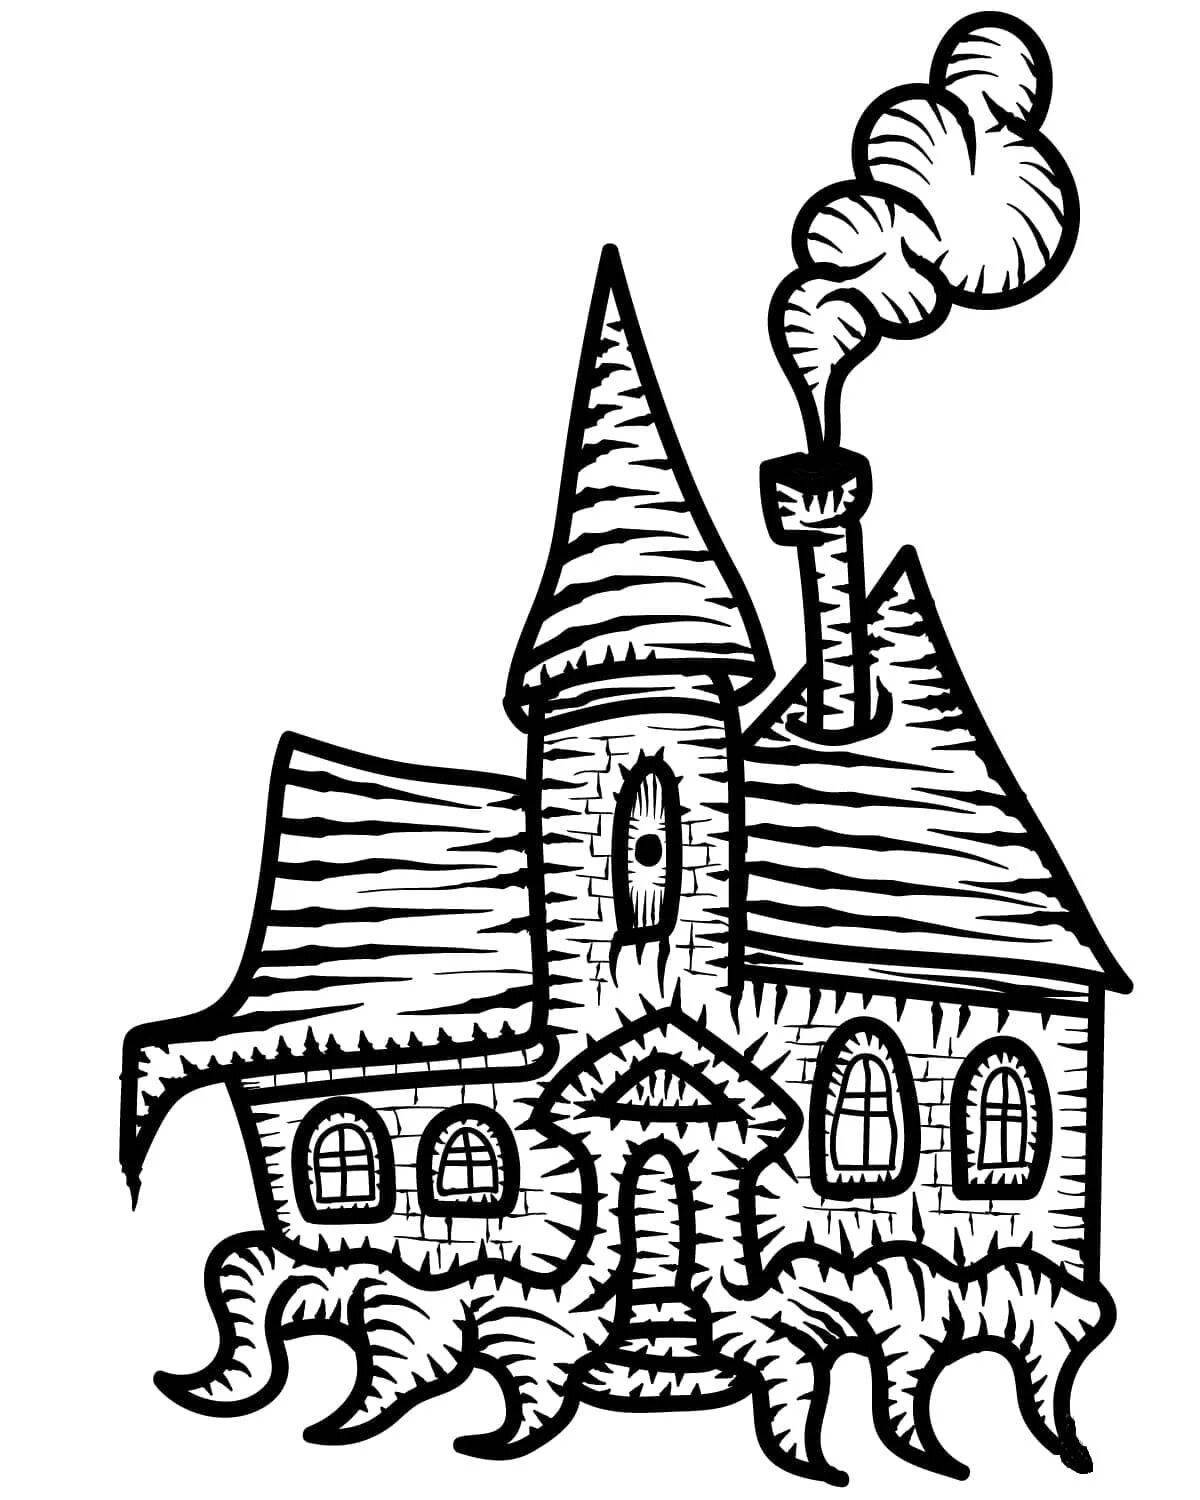 Coloring book sinister gloomy house